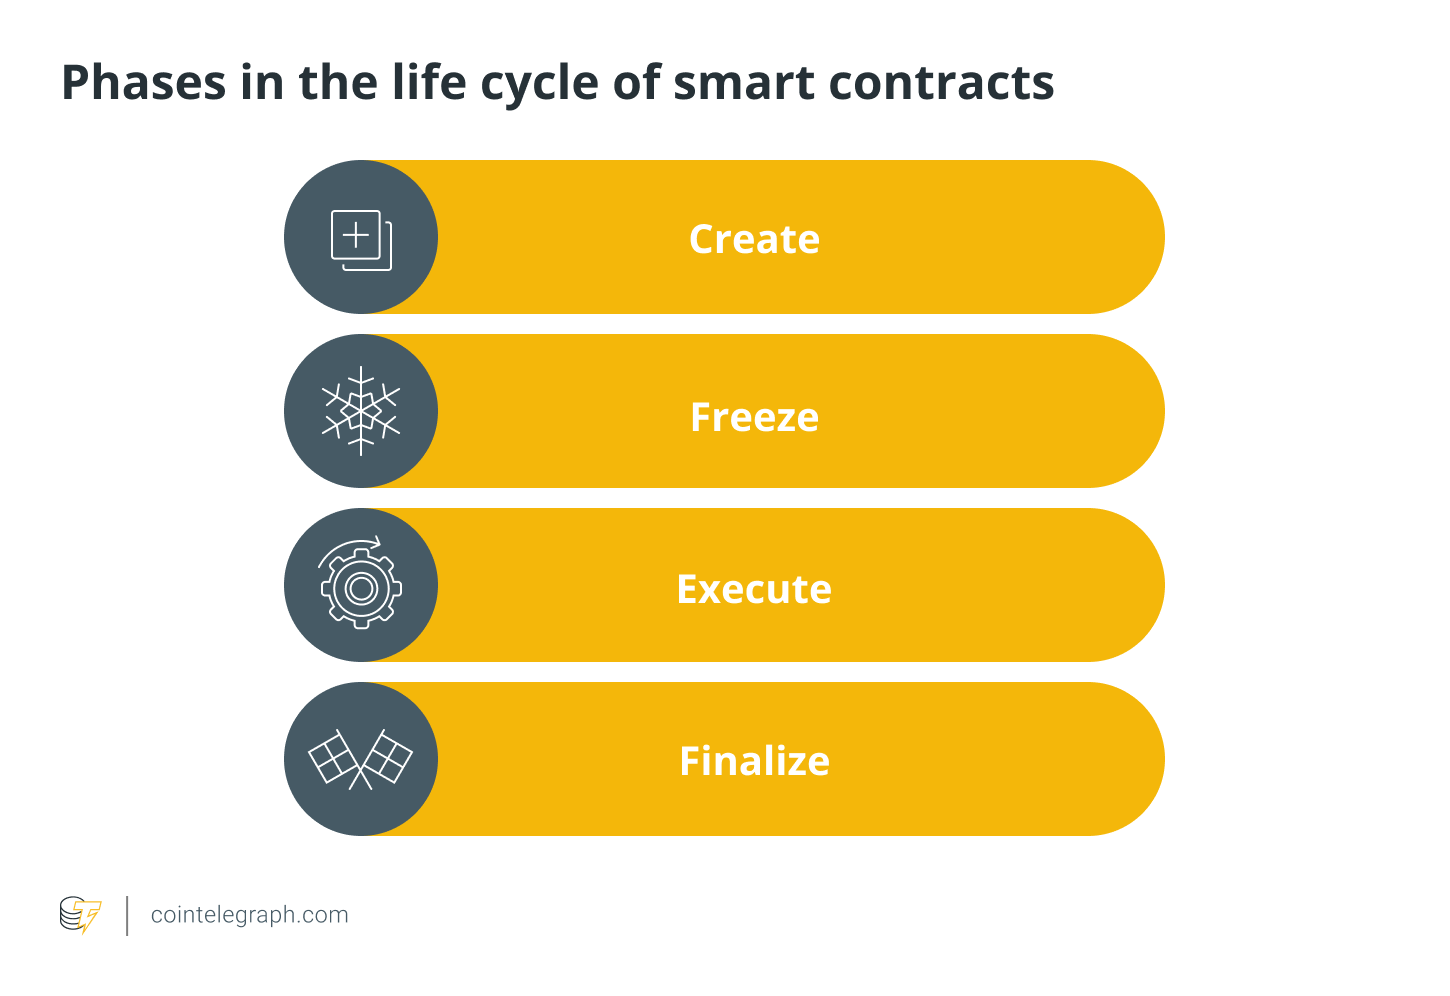 Phases in the life cycle of smart contracts